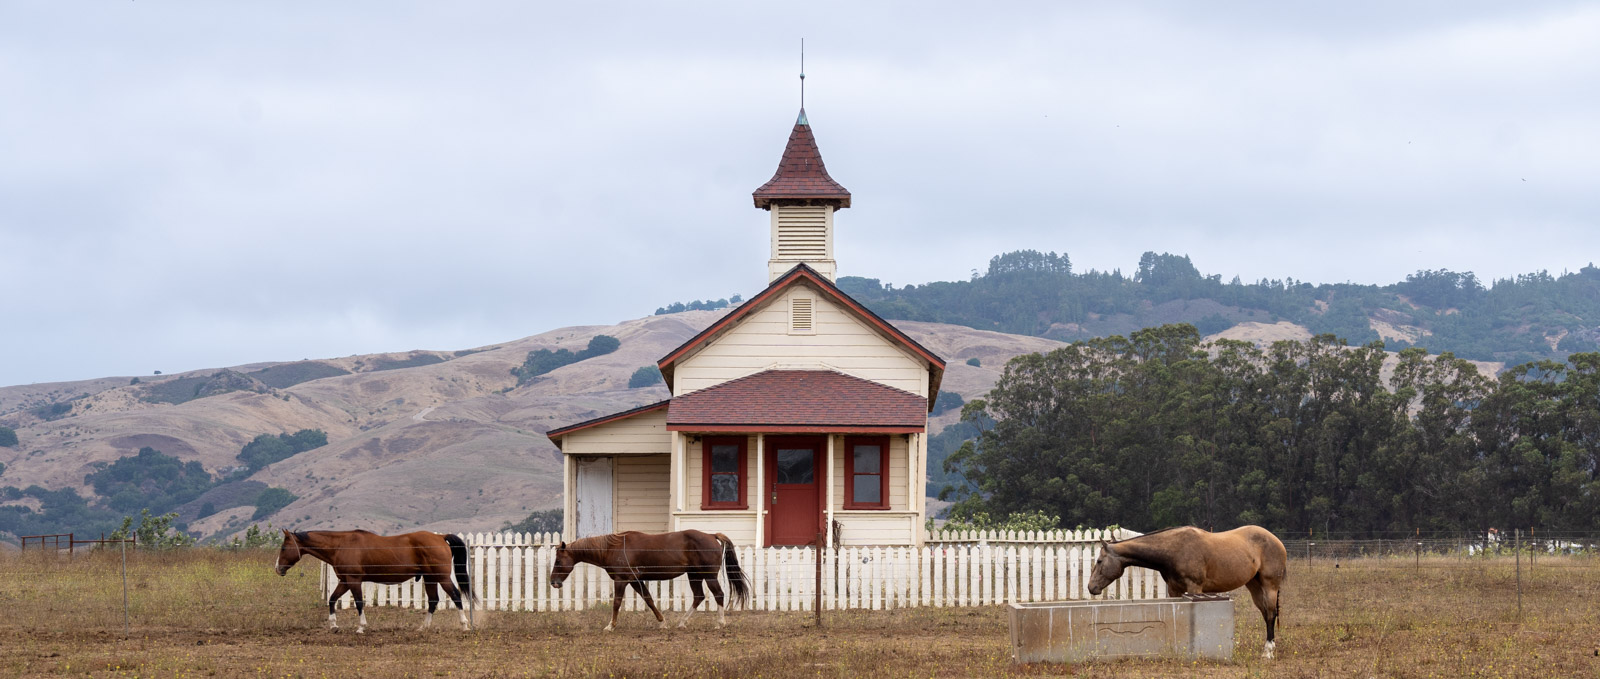 A red roofed schoolhouse in Old San Simeon, with a white picket fence, and three horses in front.